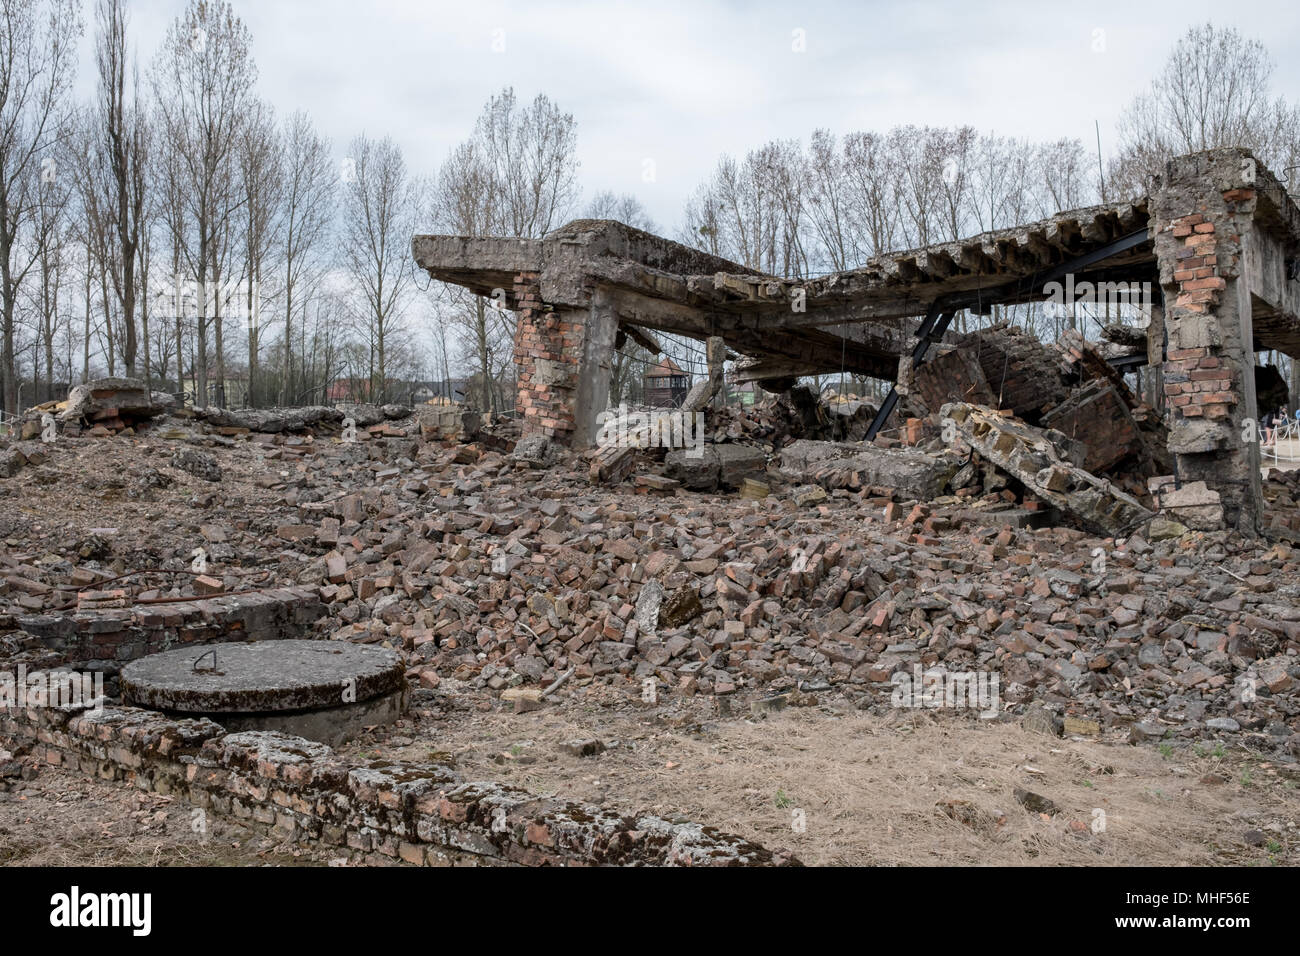 Photograph of the remains of crematorium at Auschwitz Birkenau Nazi Concentration Camp. Crematoria were blown up by the Germans at the end of WW2. Stock Photo